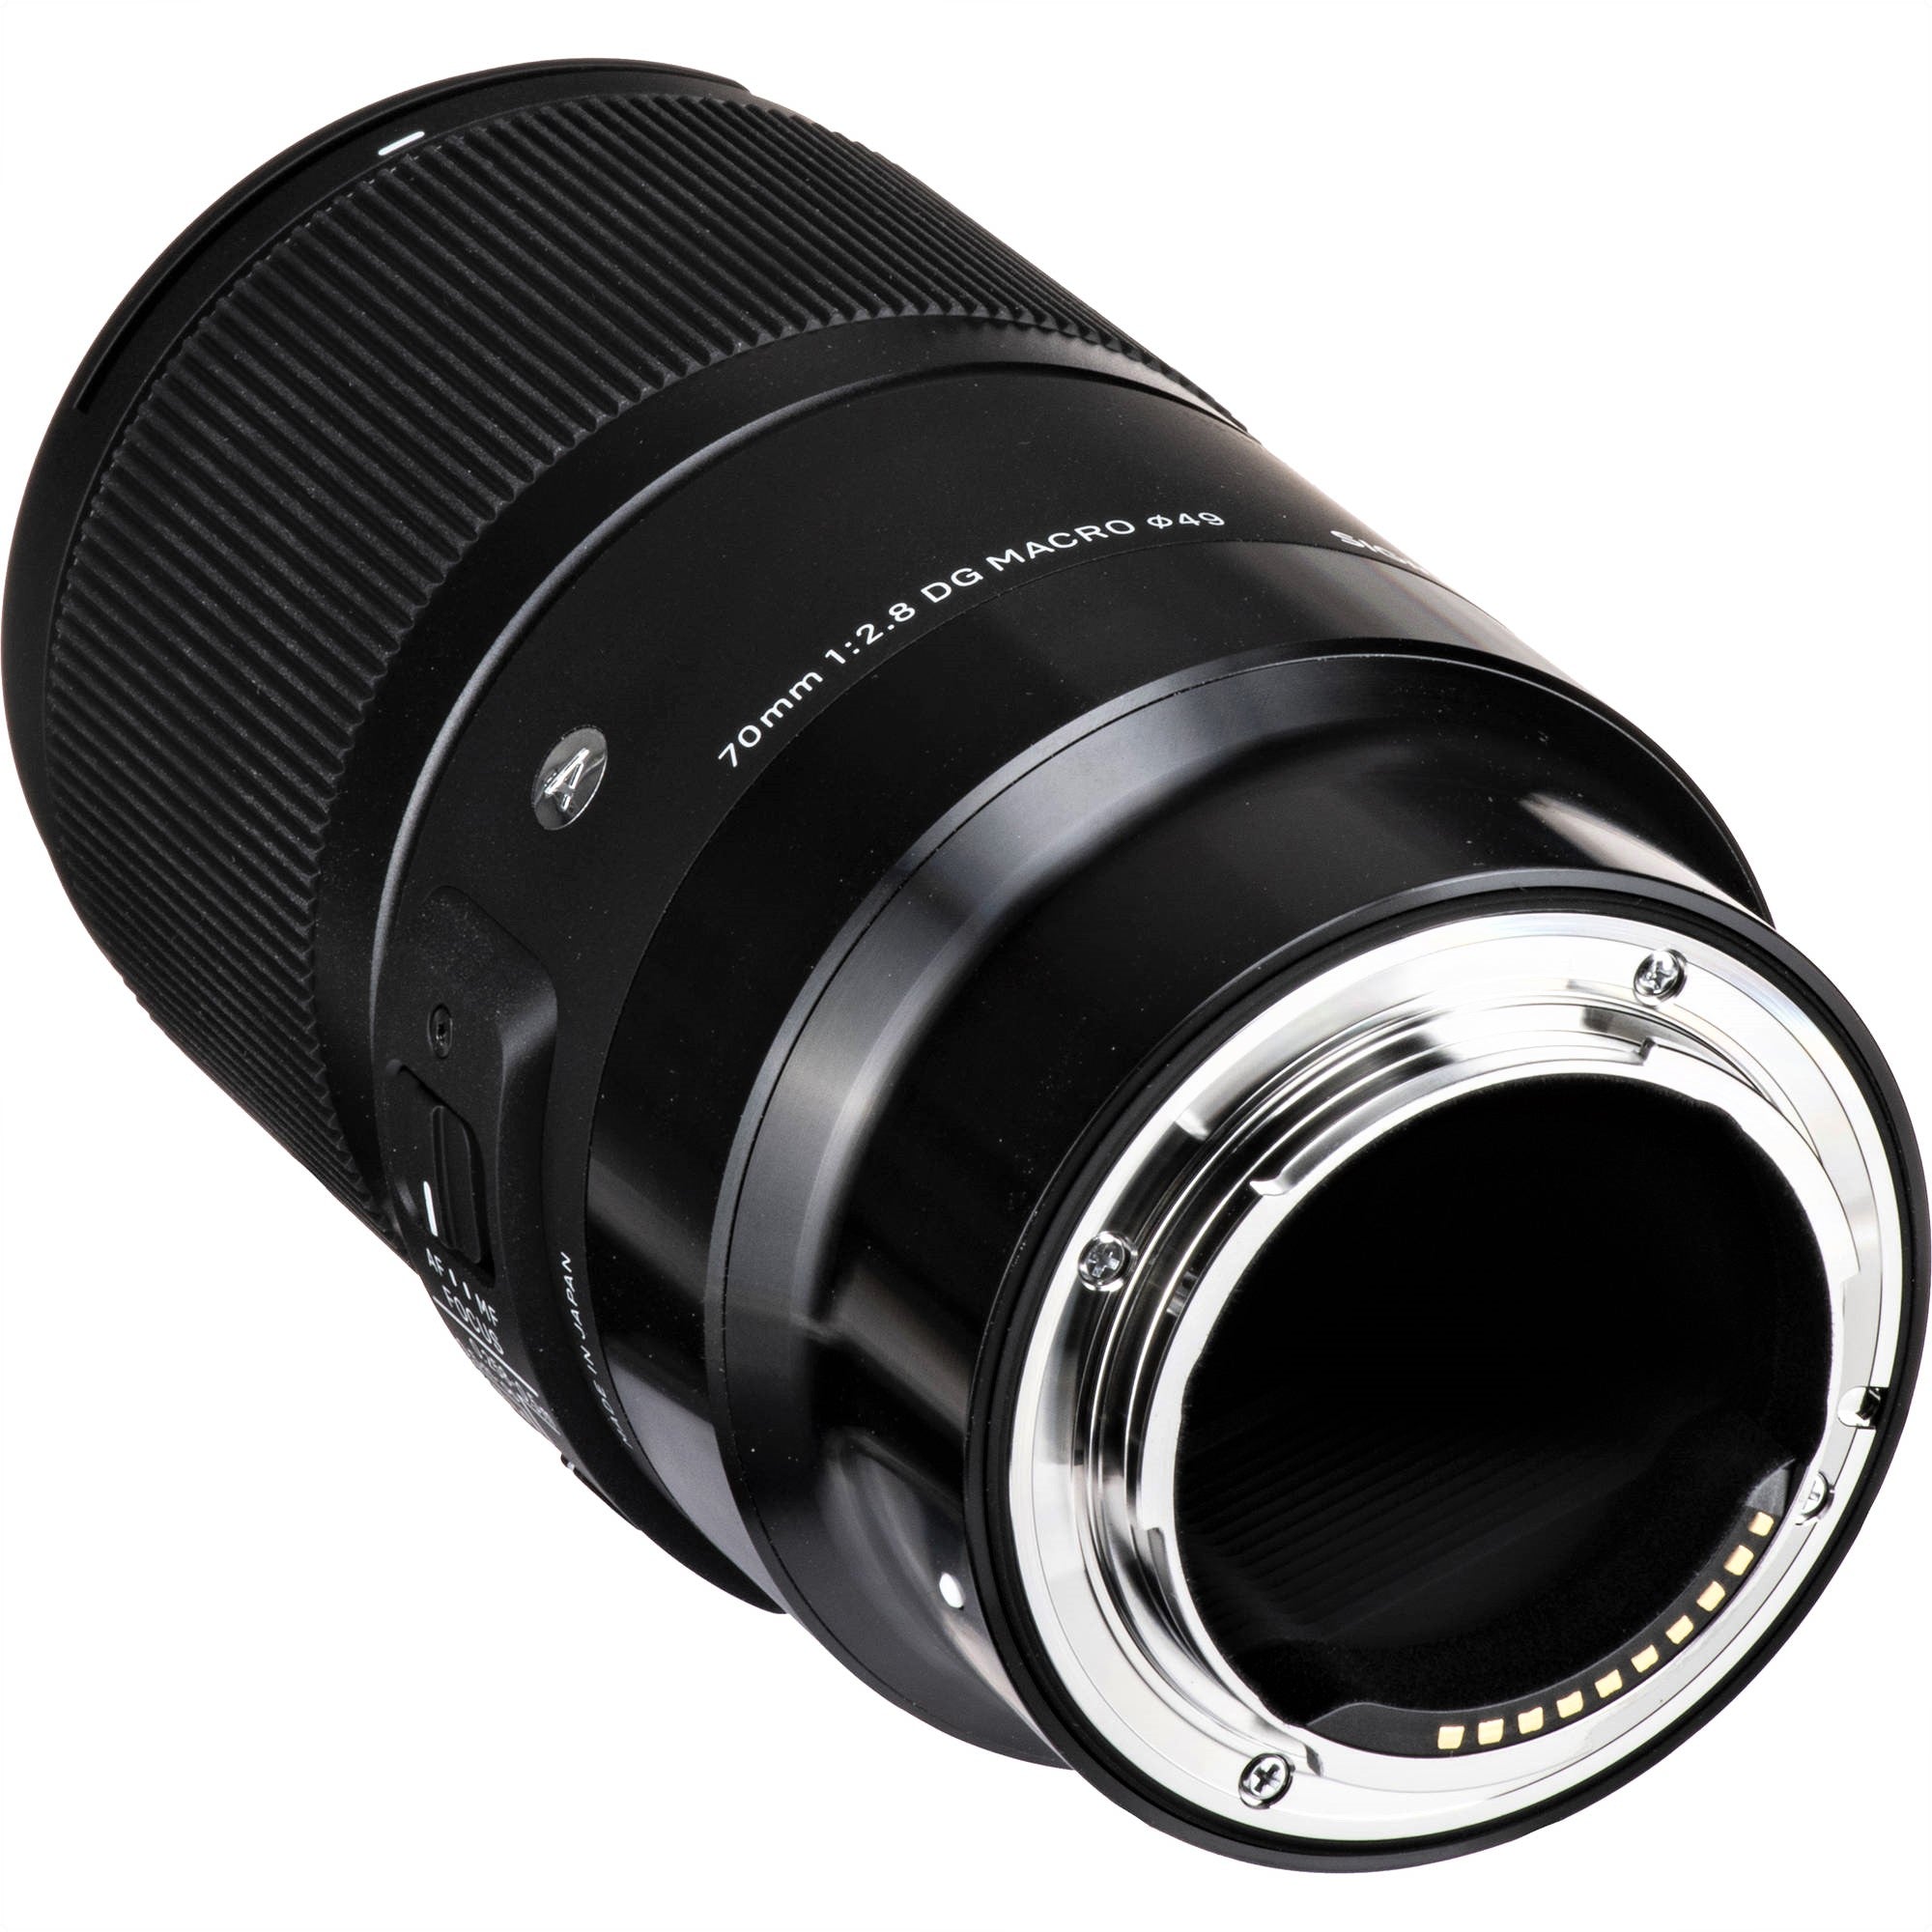 Sigma 70mm F2.8 DG Macro Art Lens for Sony E in a Back-Side View